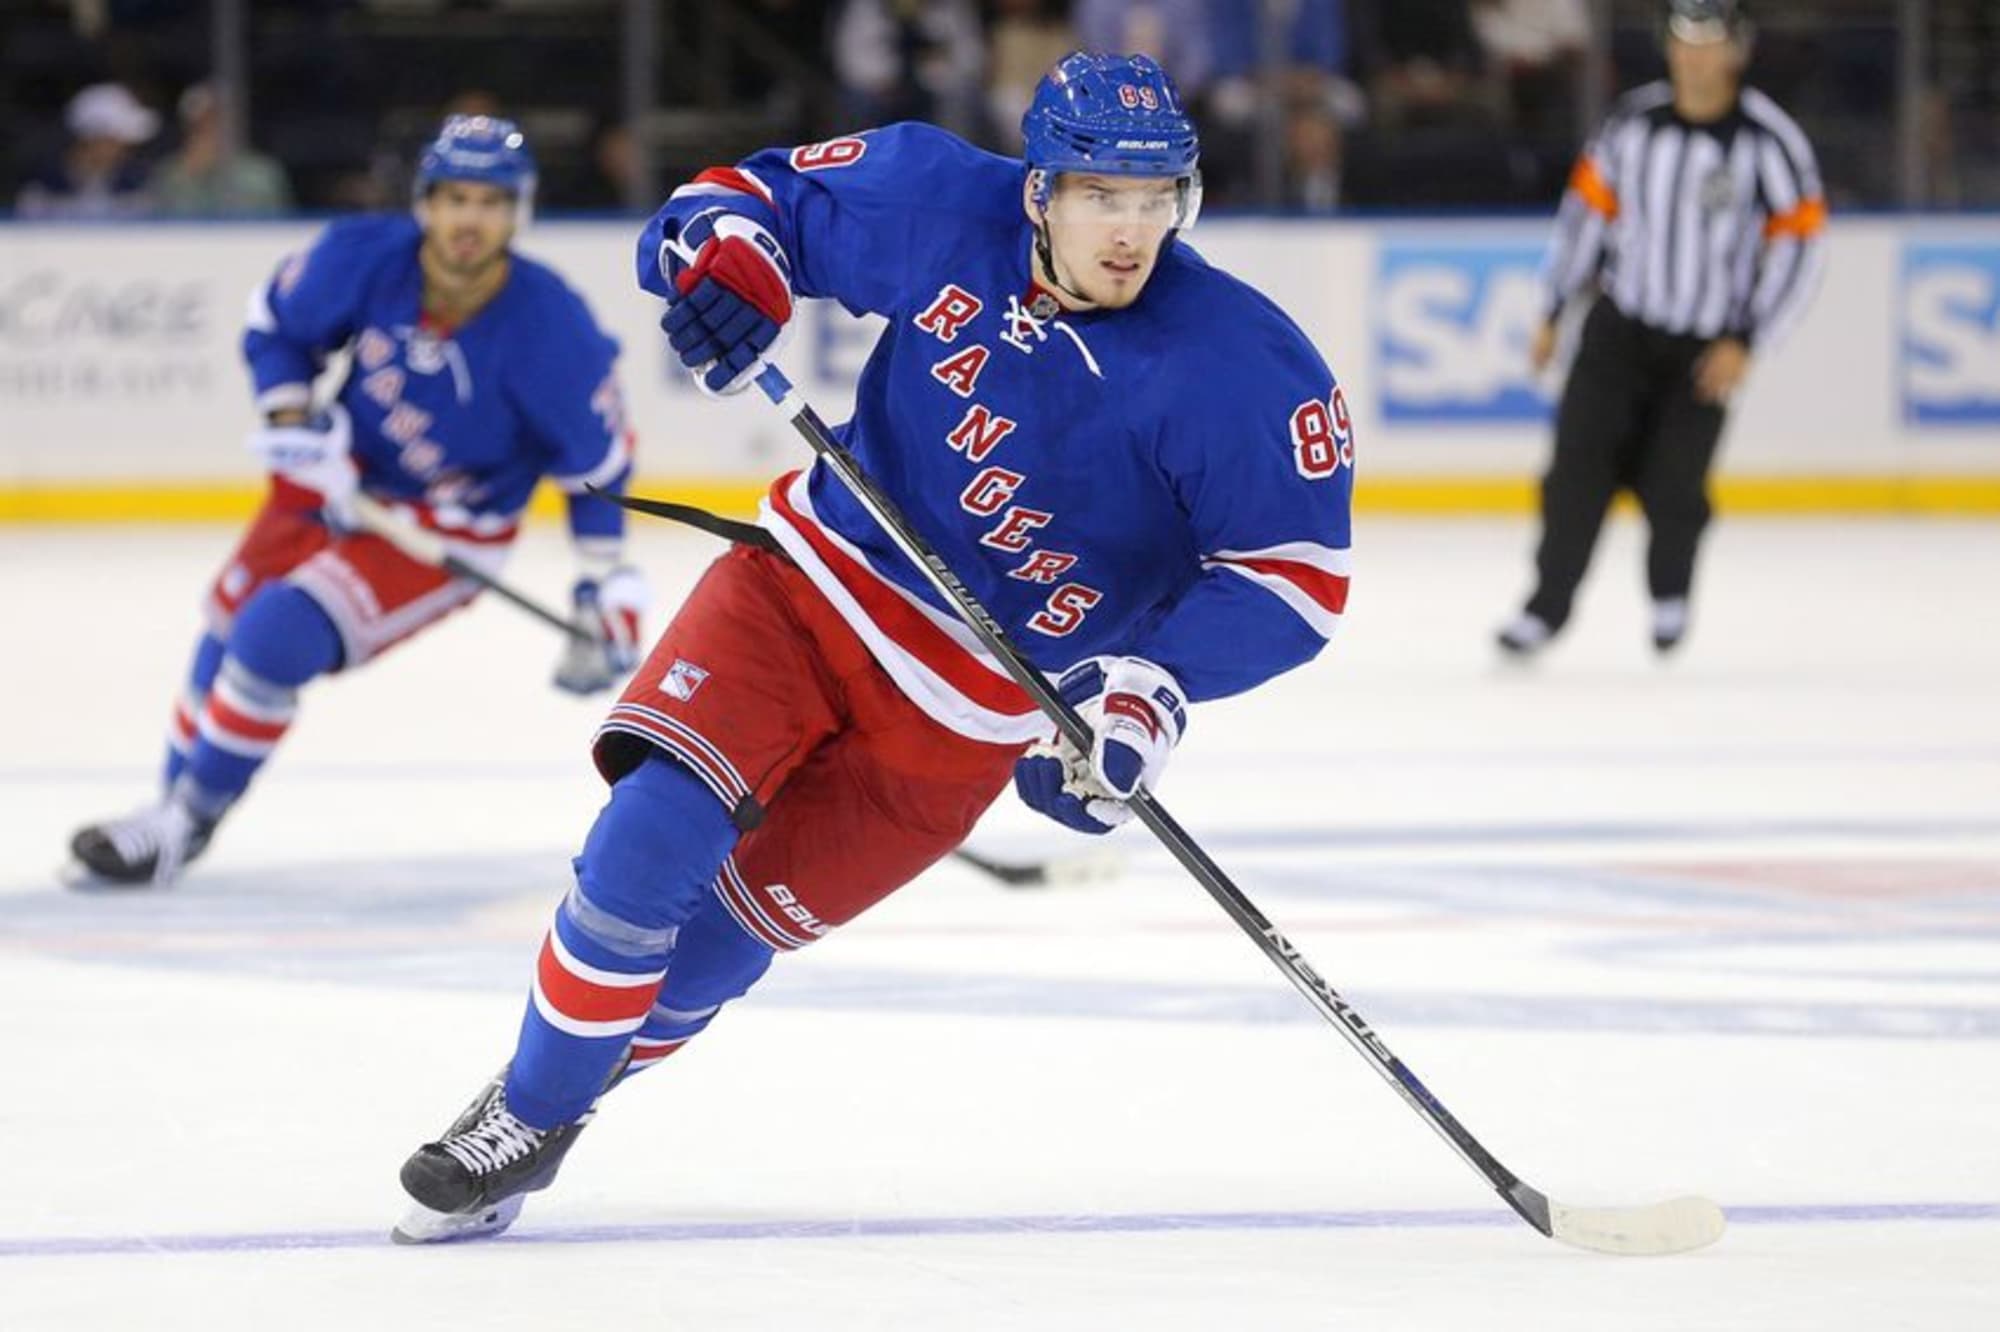 OFFICIAL: #NYR Pavel Buchnevich - New York Rangers